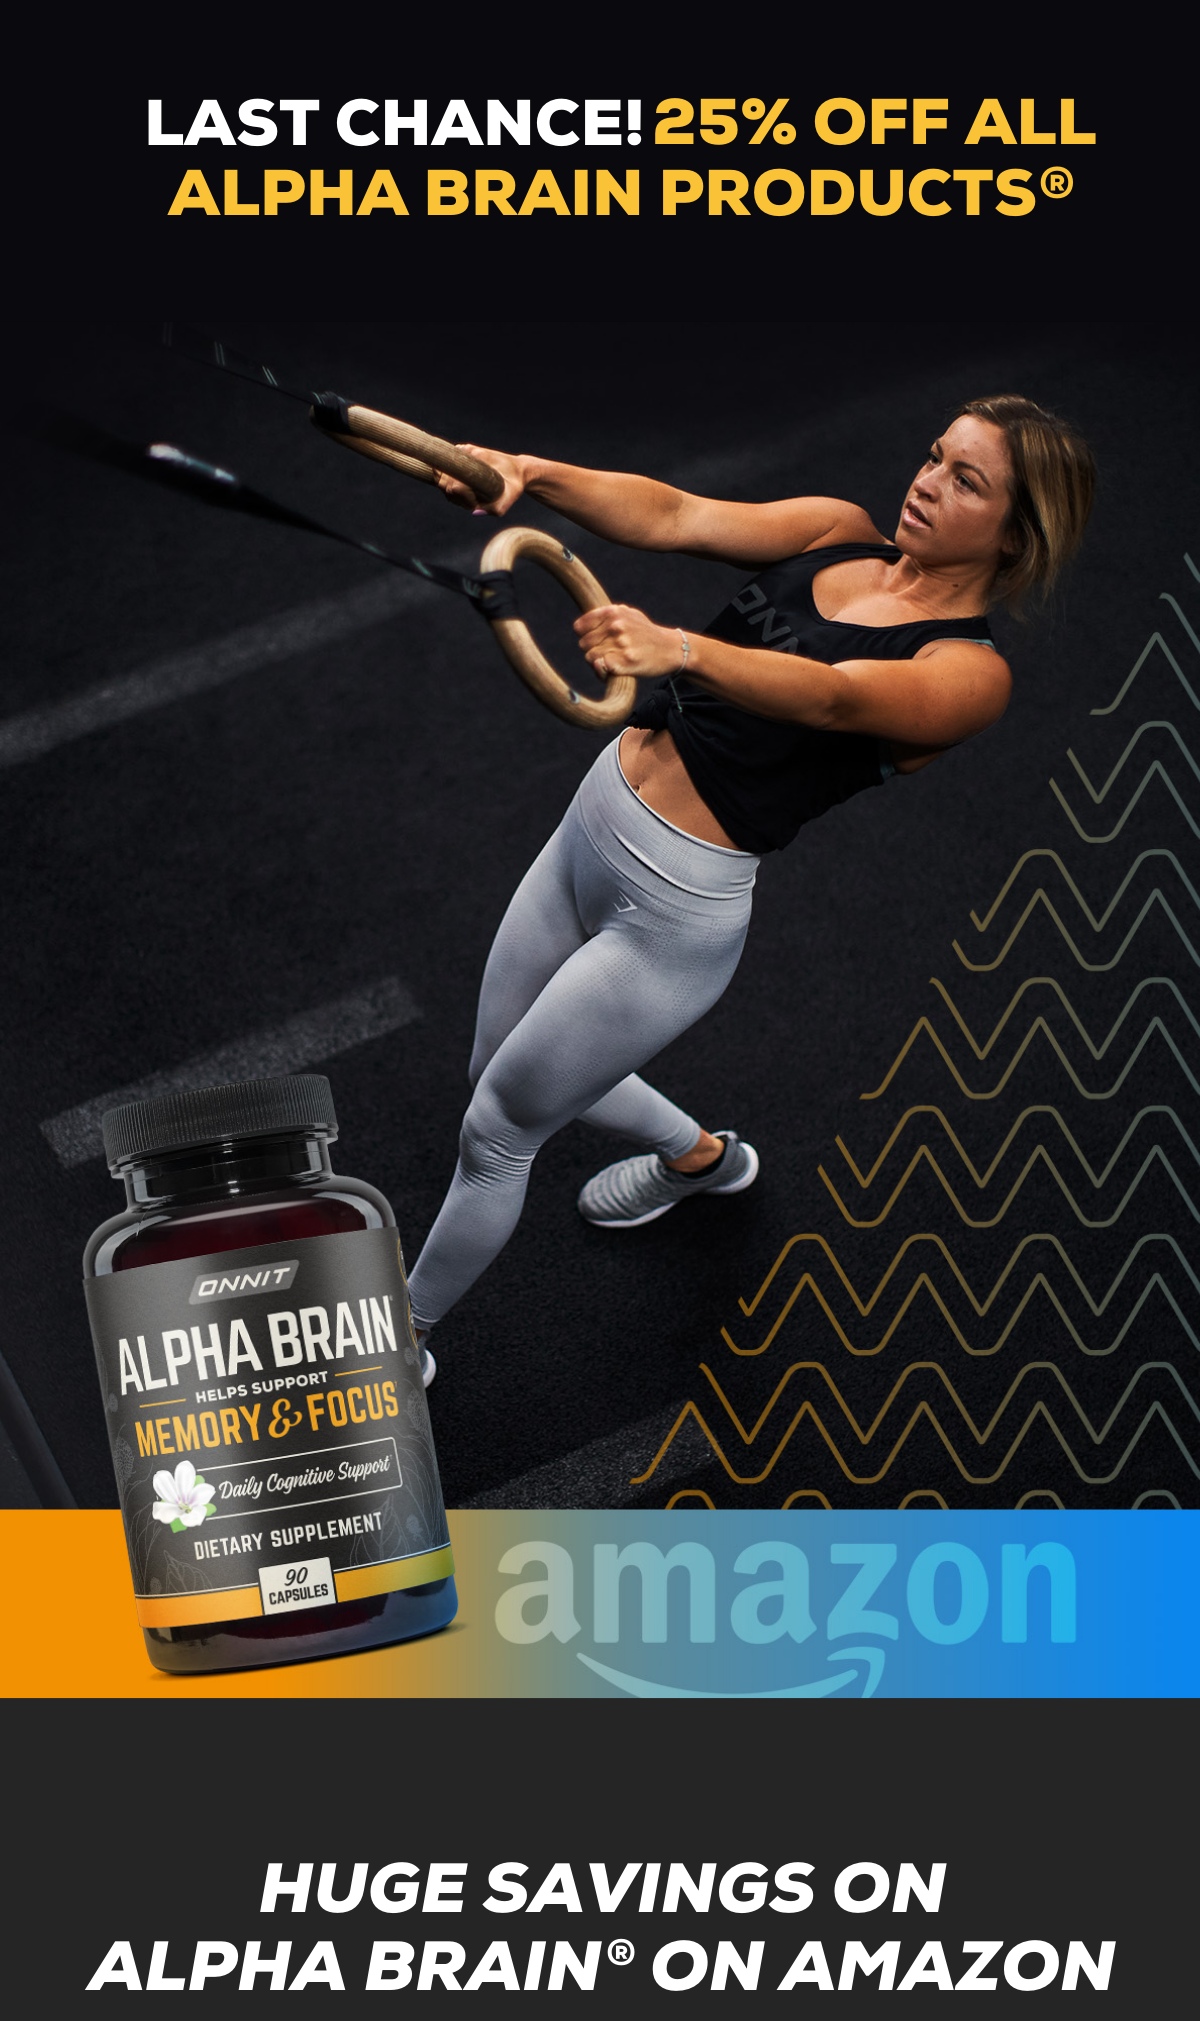 onnit Black Friday savings are happening now! Give the Alpha Brain